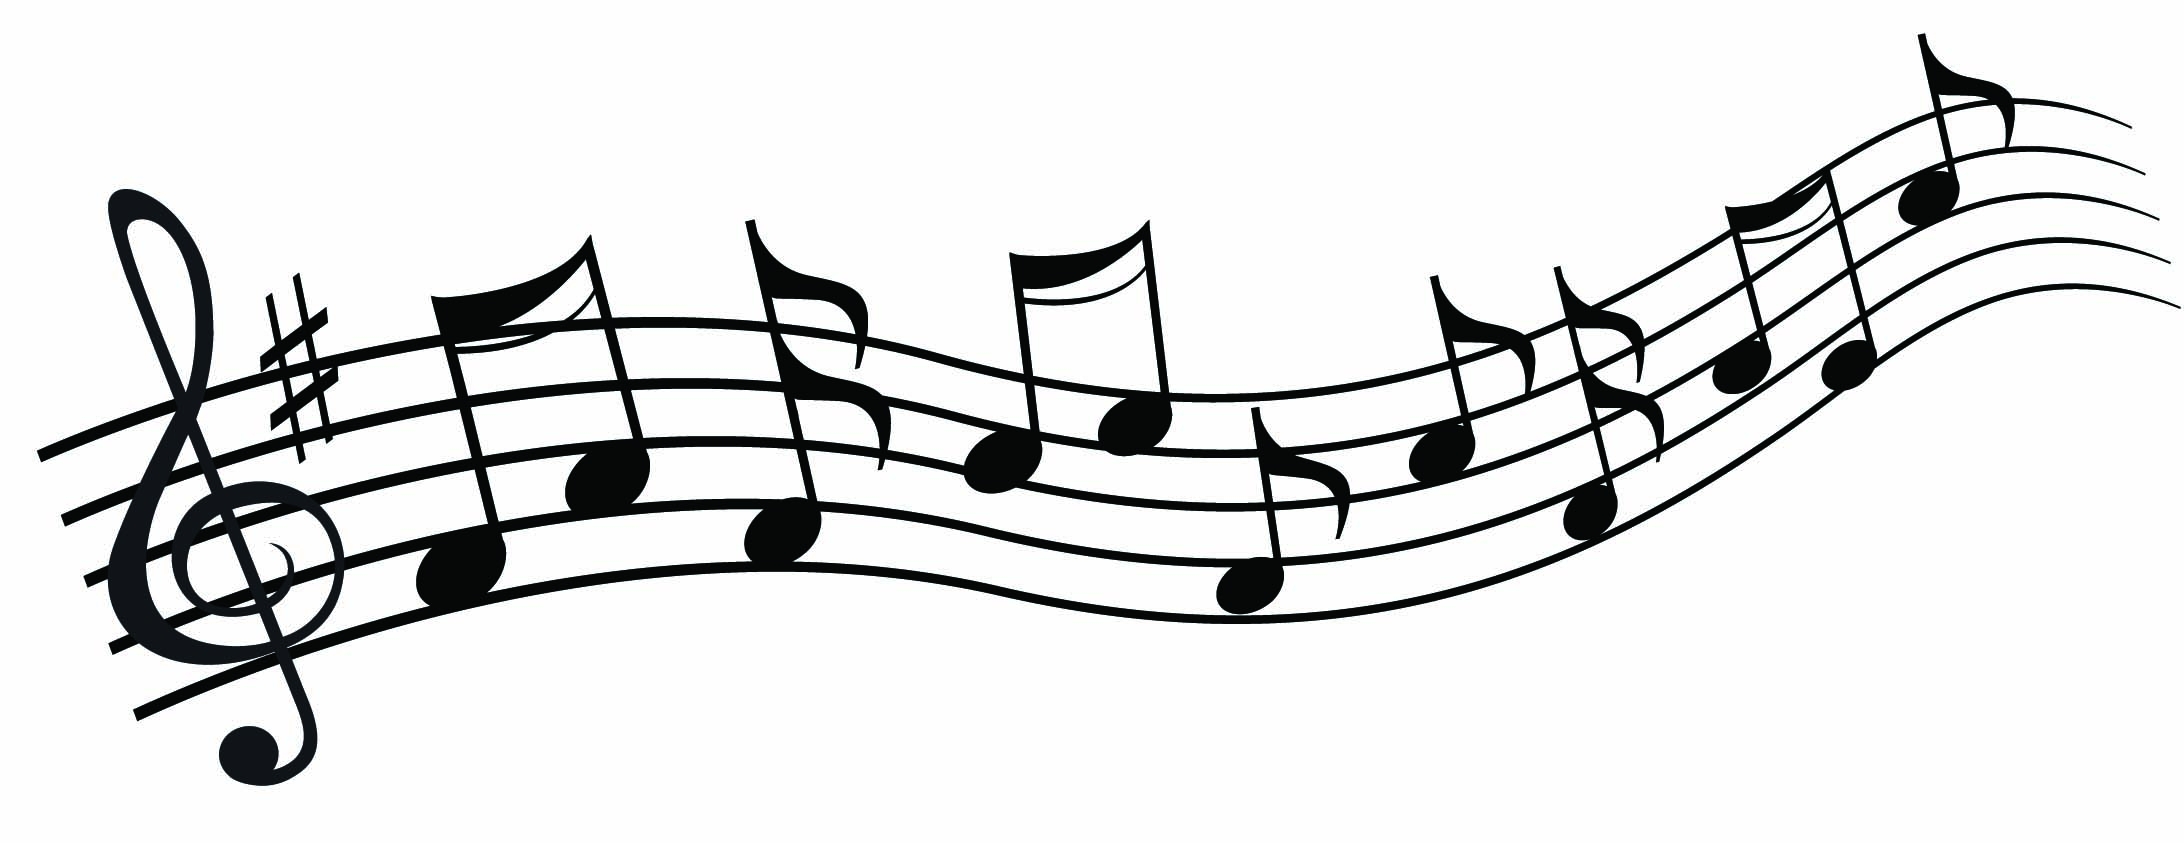 Music Staff With Notes Clipart